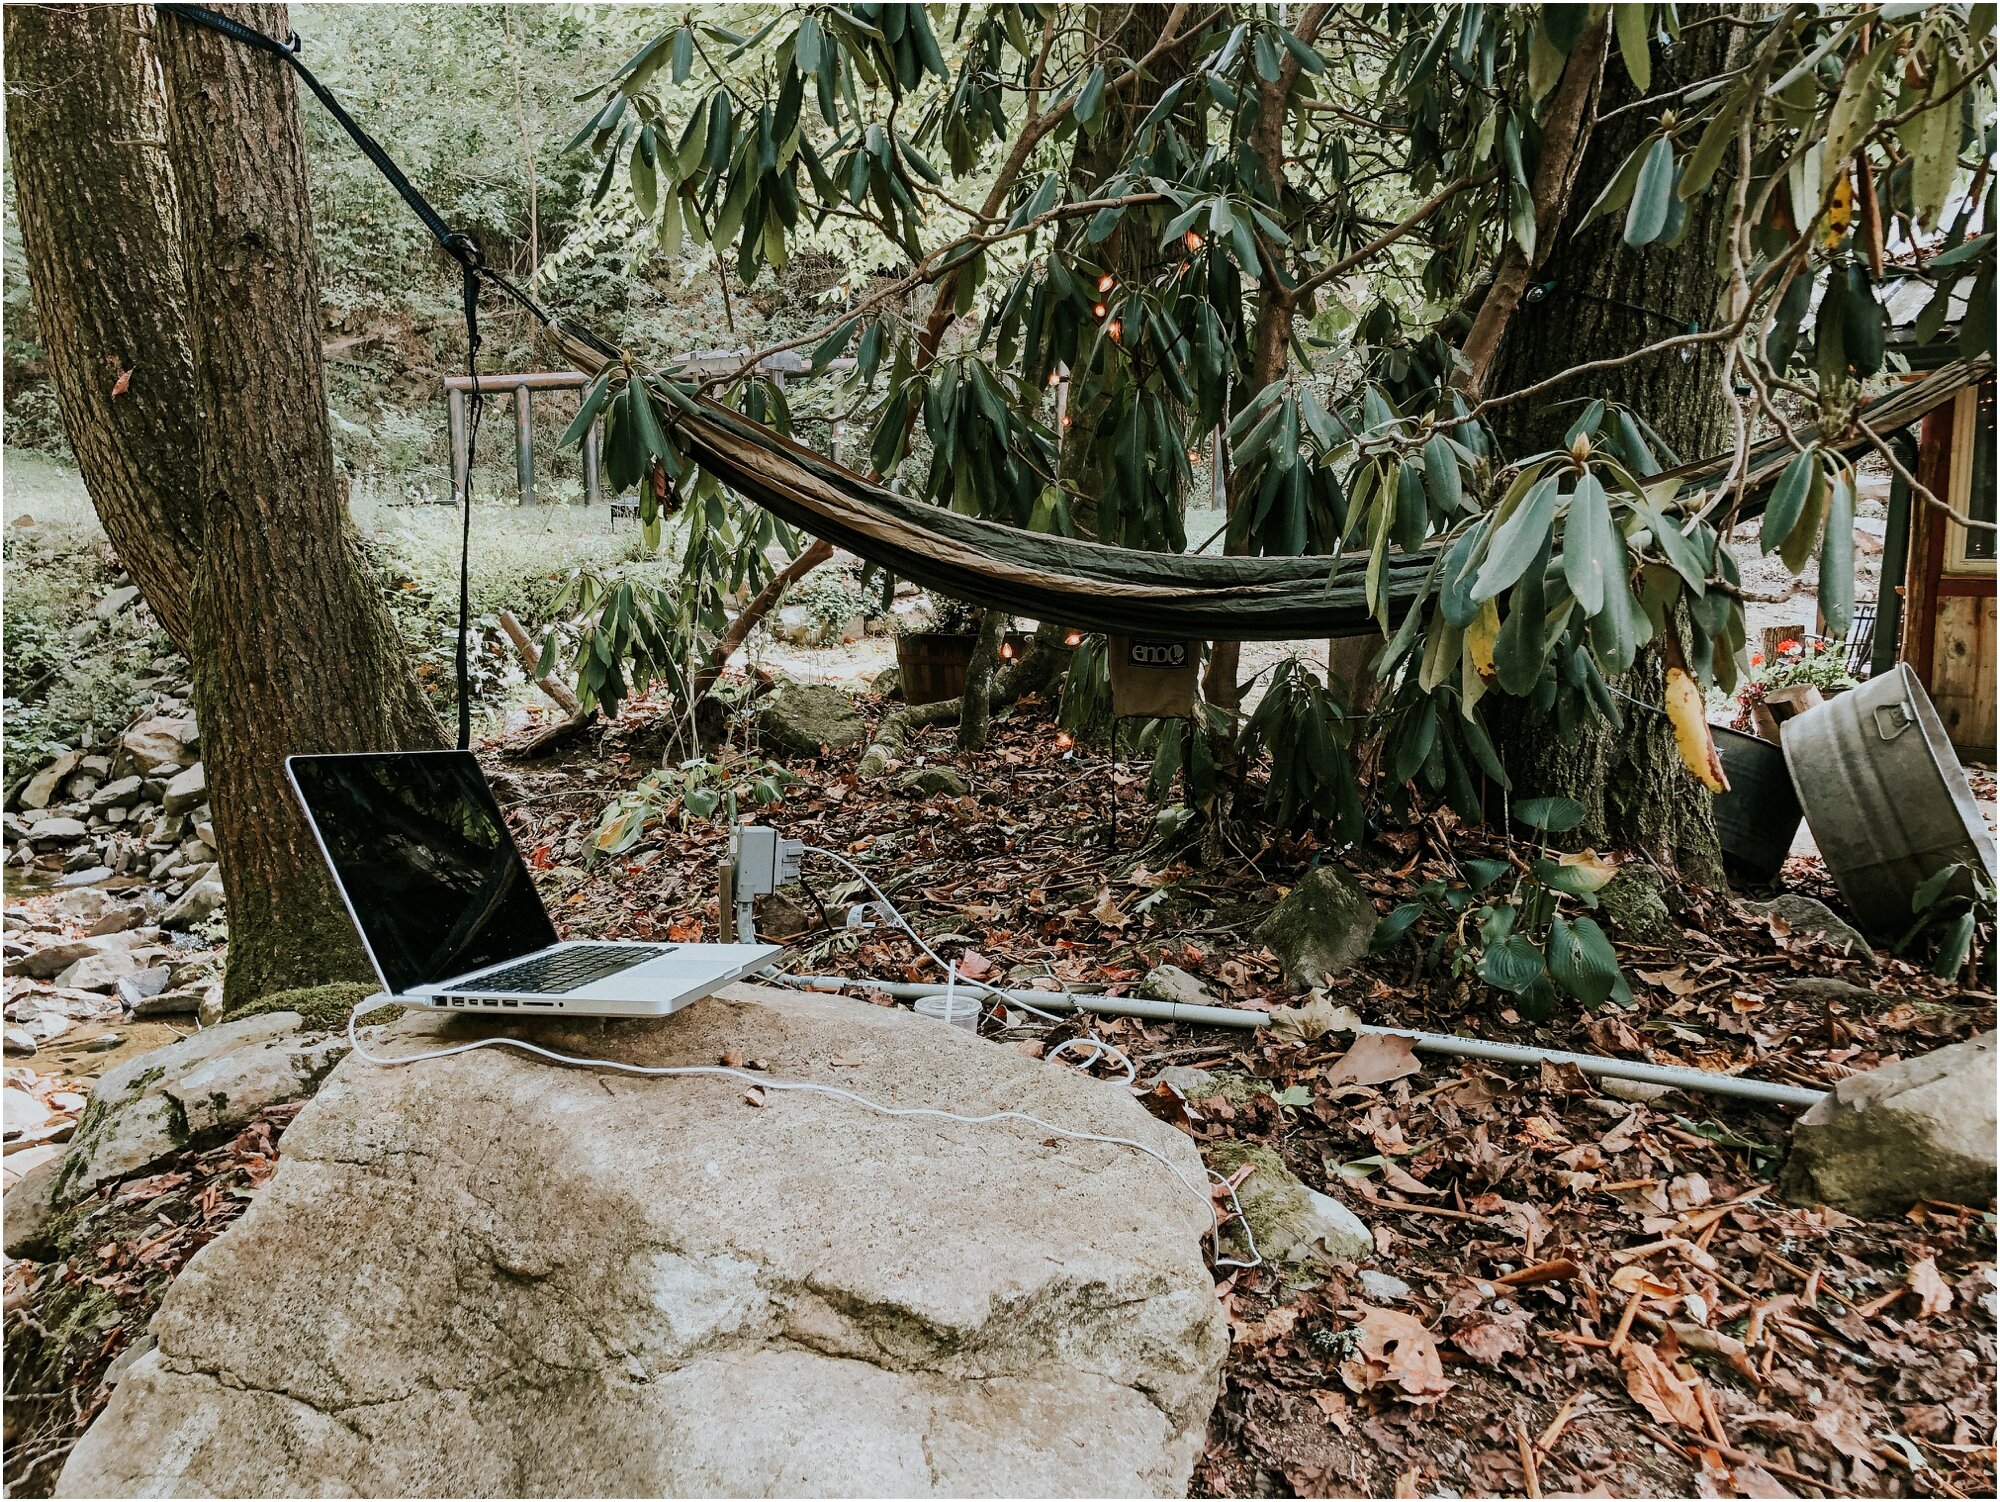   Once we got back from vacay, it was time for mini sessions at the Camp at Buffalo Mountain! Matt, one of the owners, set me up with the best work spot- hammock + electric + wifi + babbling stream.  